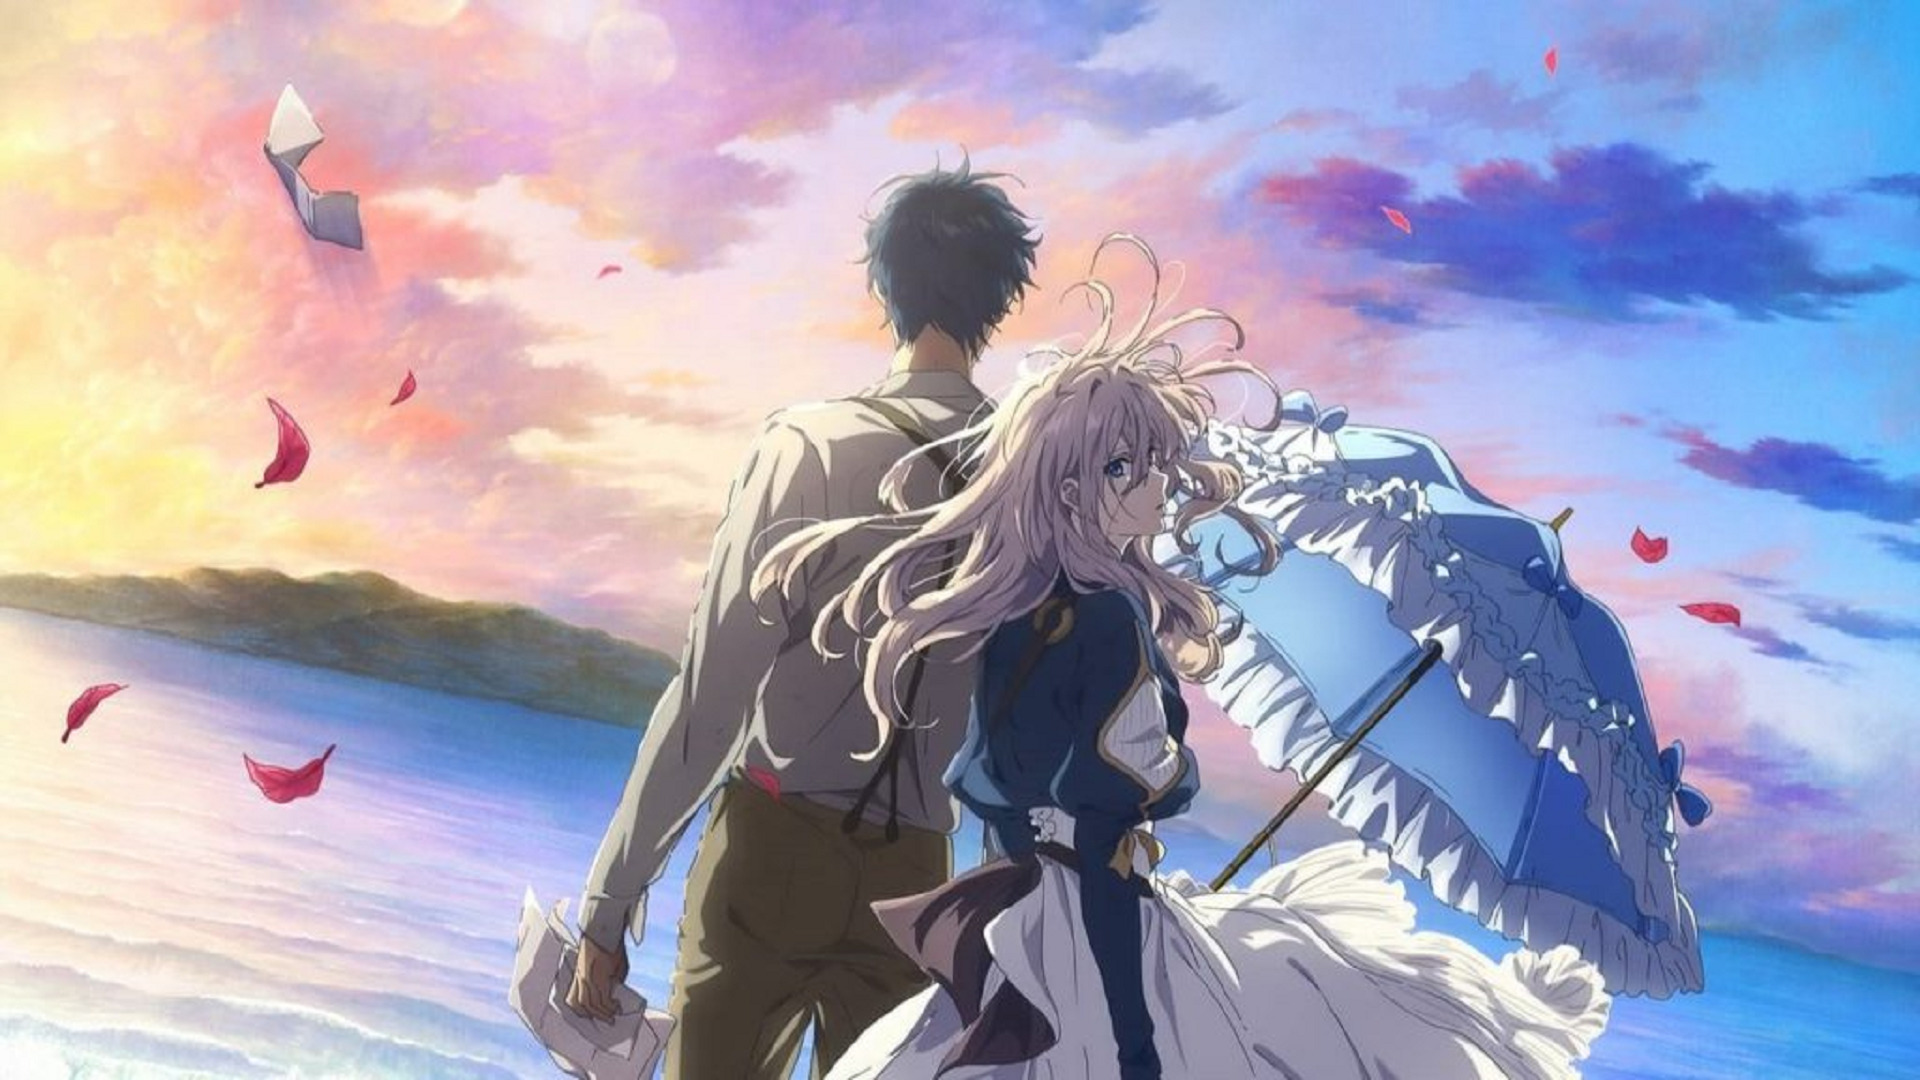 Violet Evergarden anime of the year